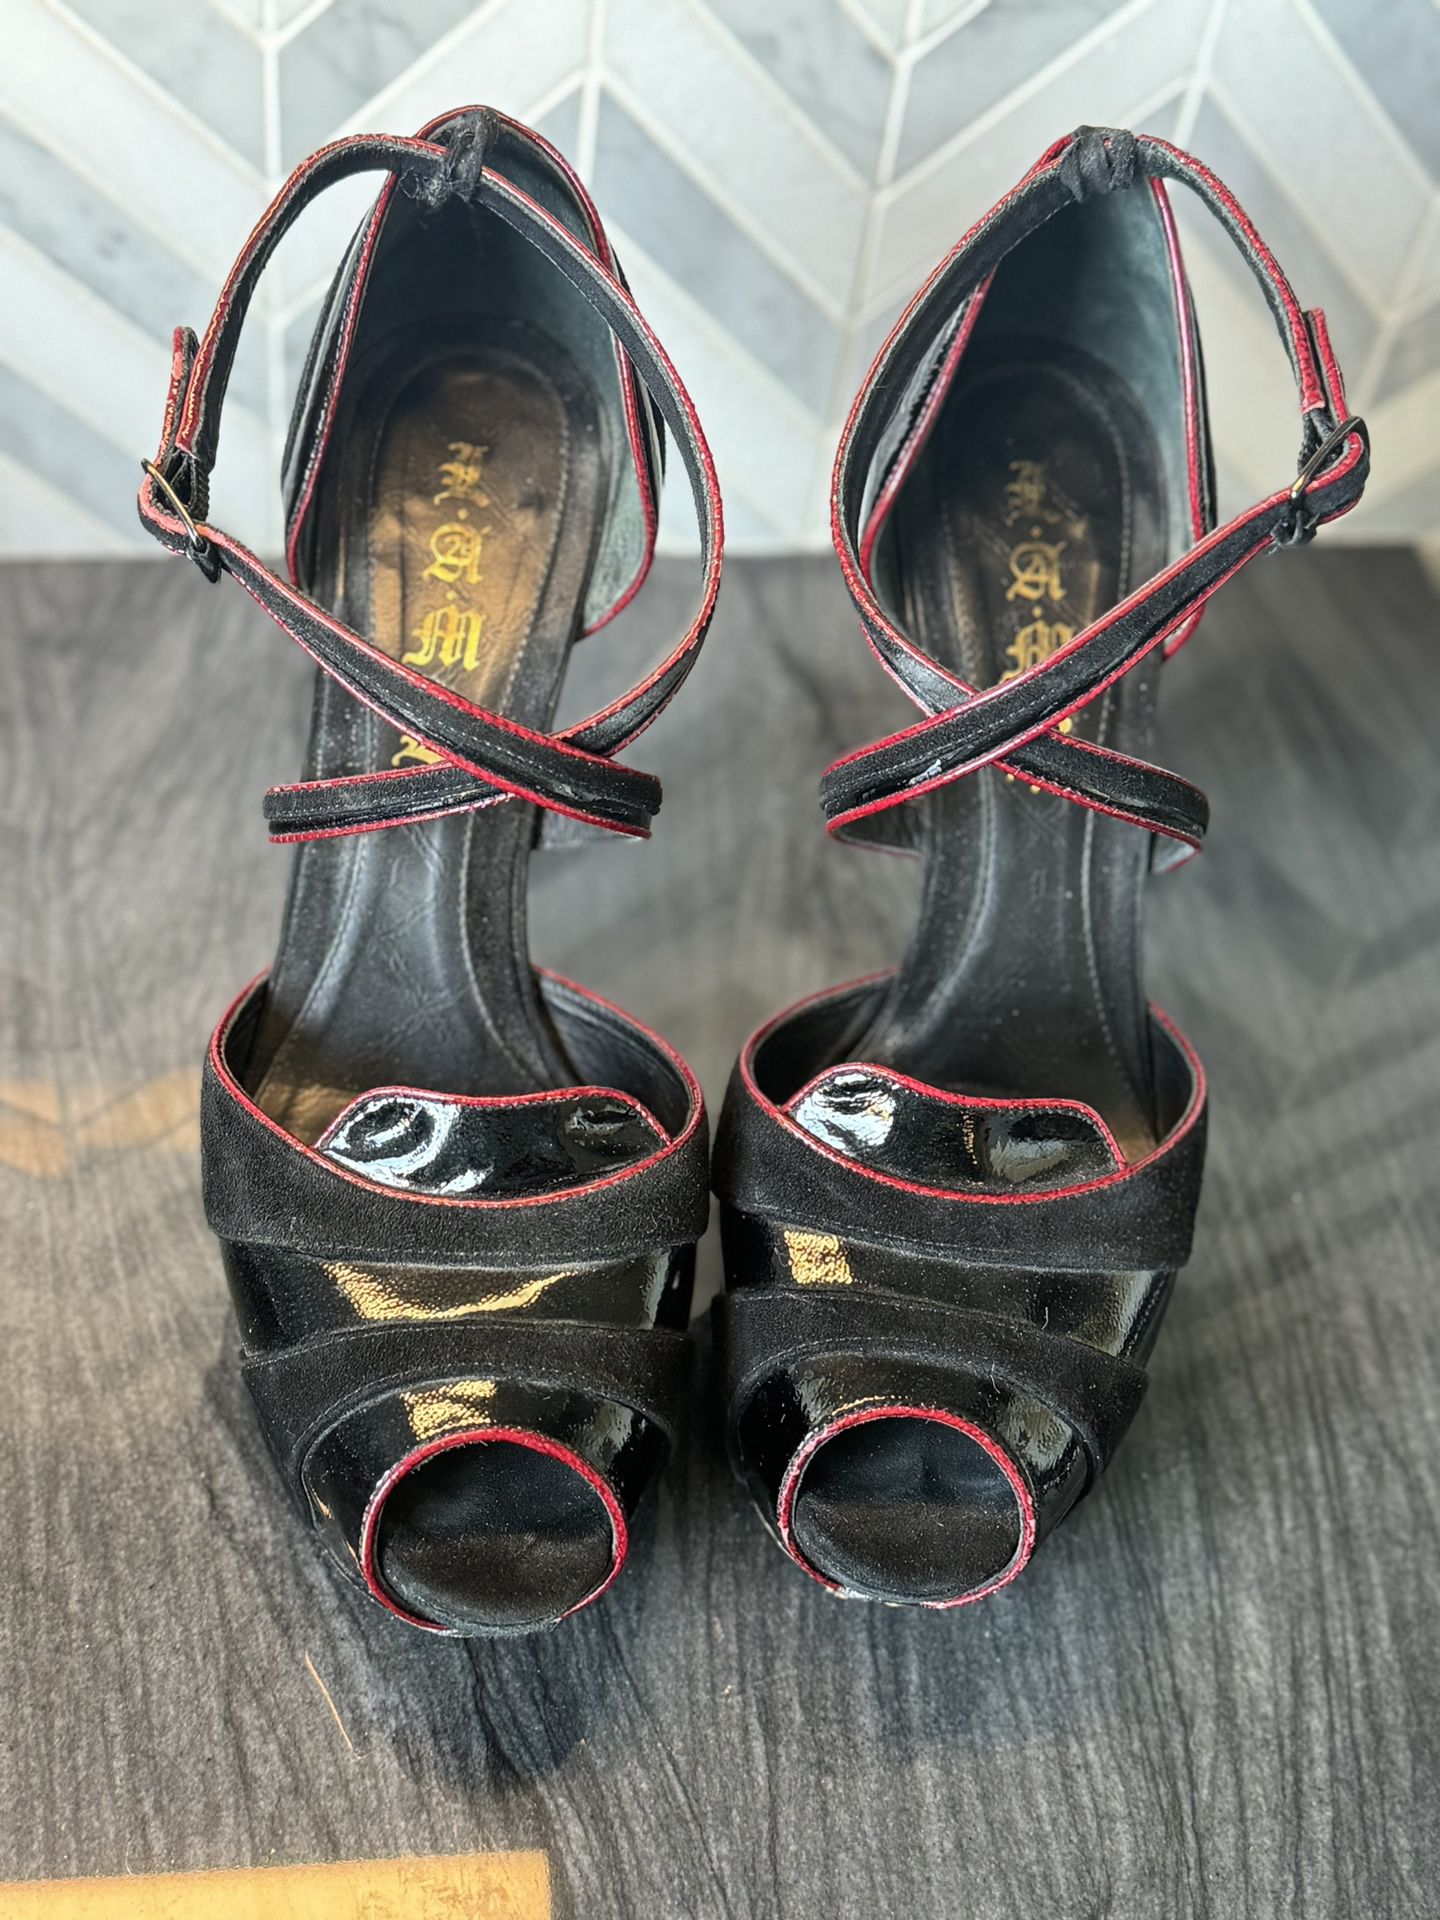 L.A.M.B black w/red accents suede & patent leather platform strappy 4.75” heels.